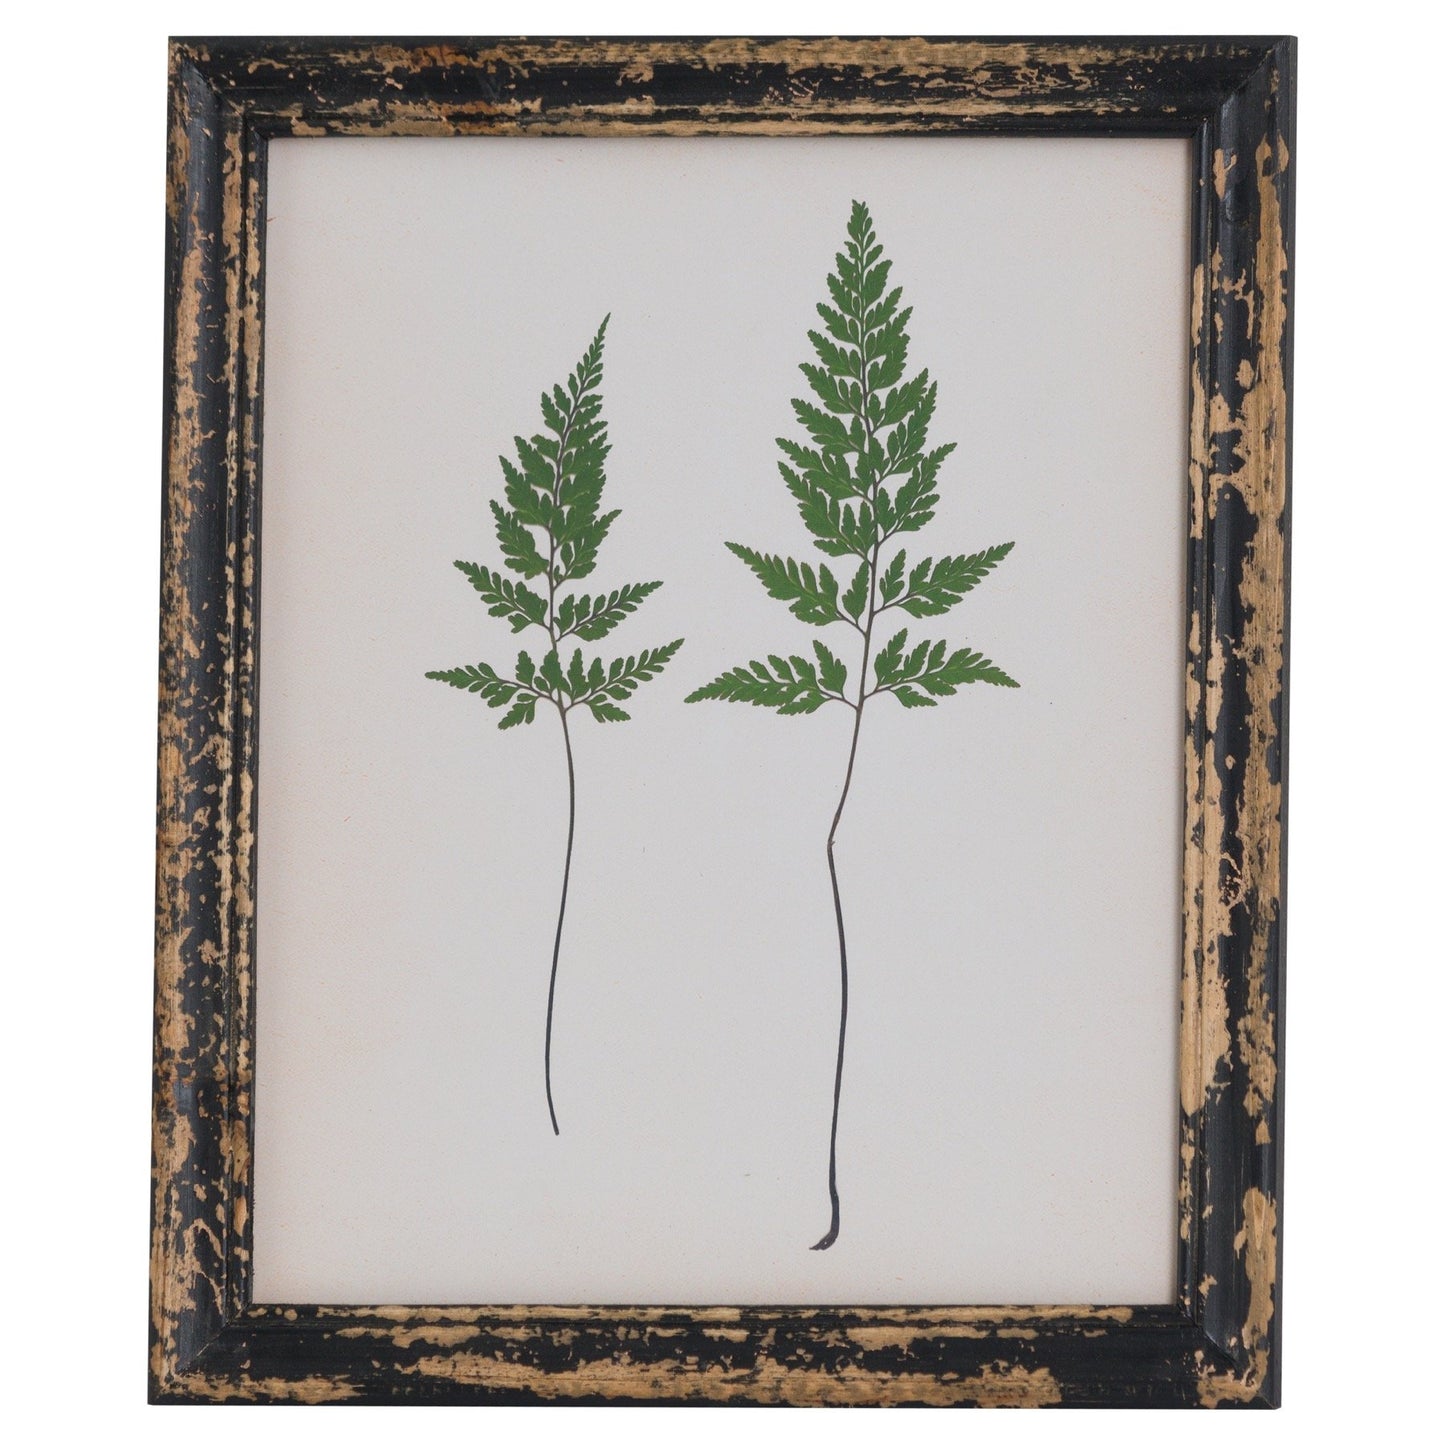 Rustic Framed Botanical Pair Of Ferns Picture